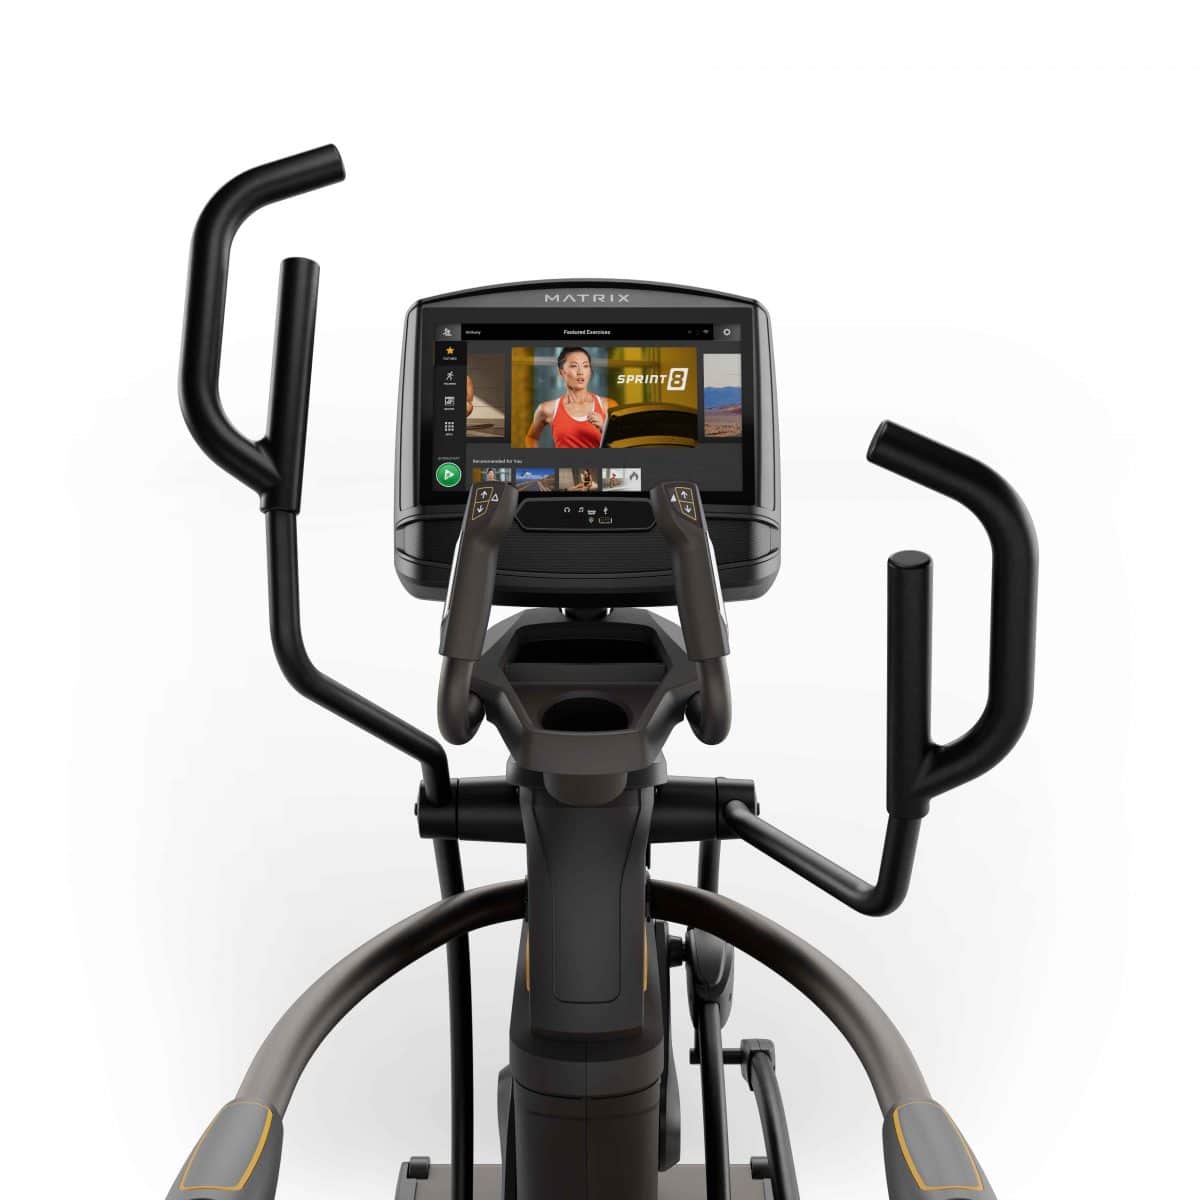 A elliptical trainer with a monitor on it.